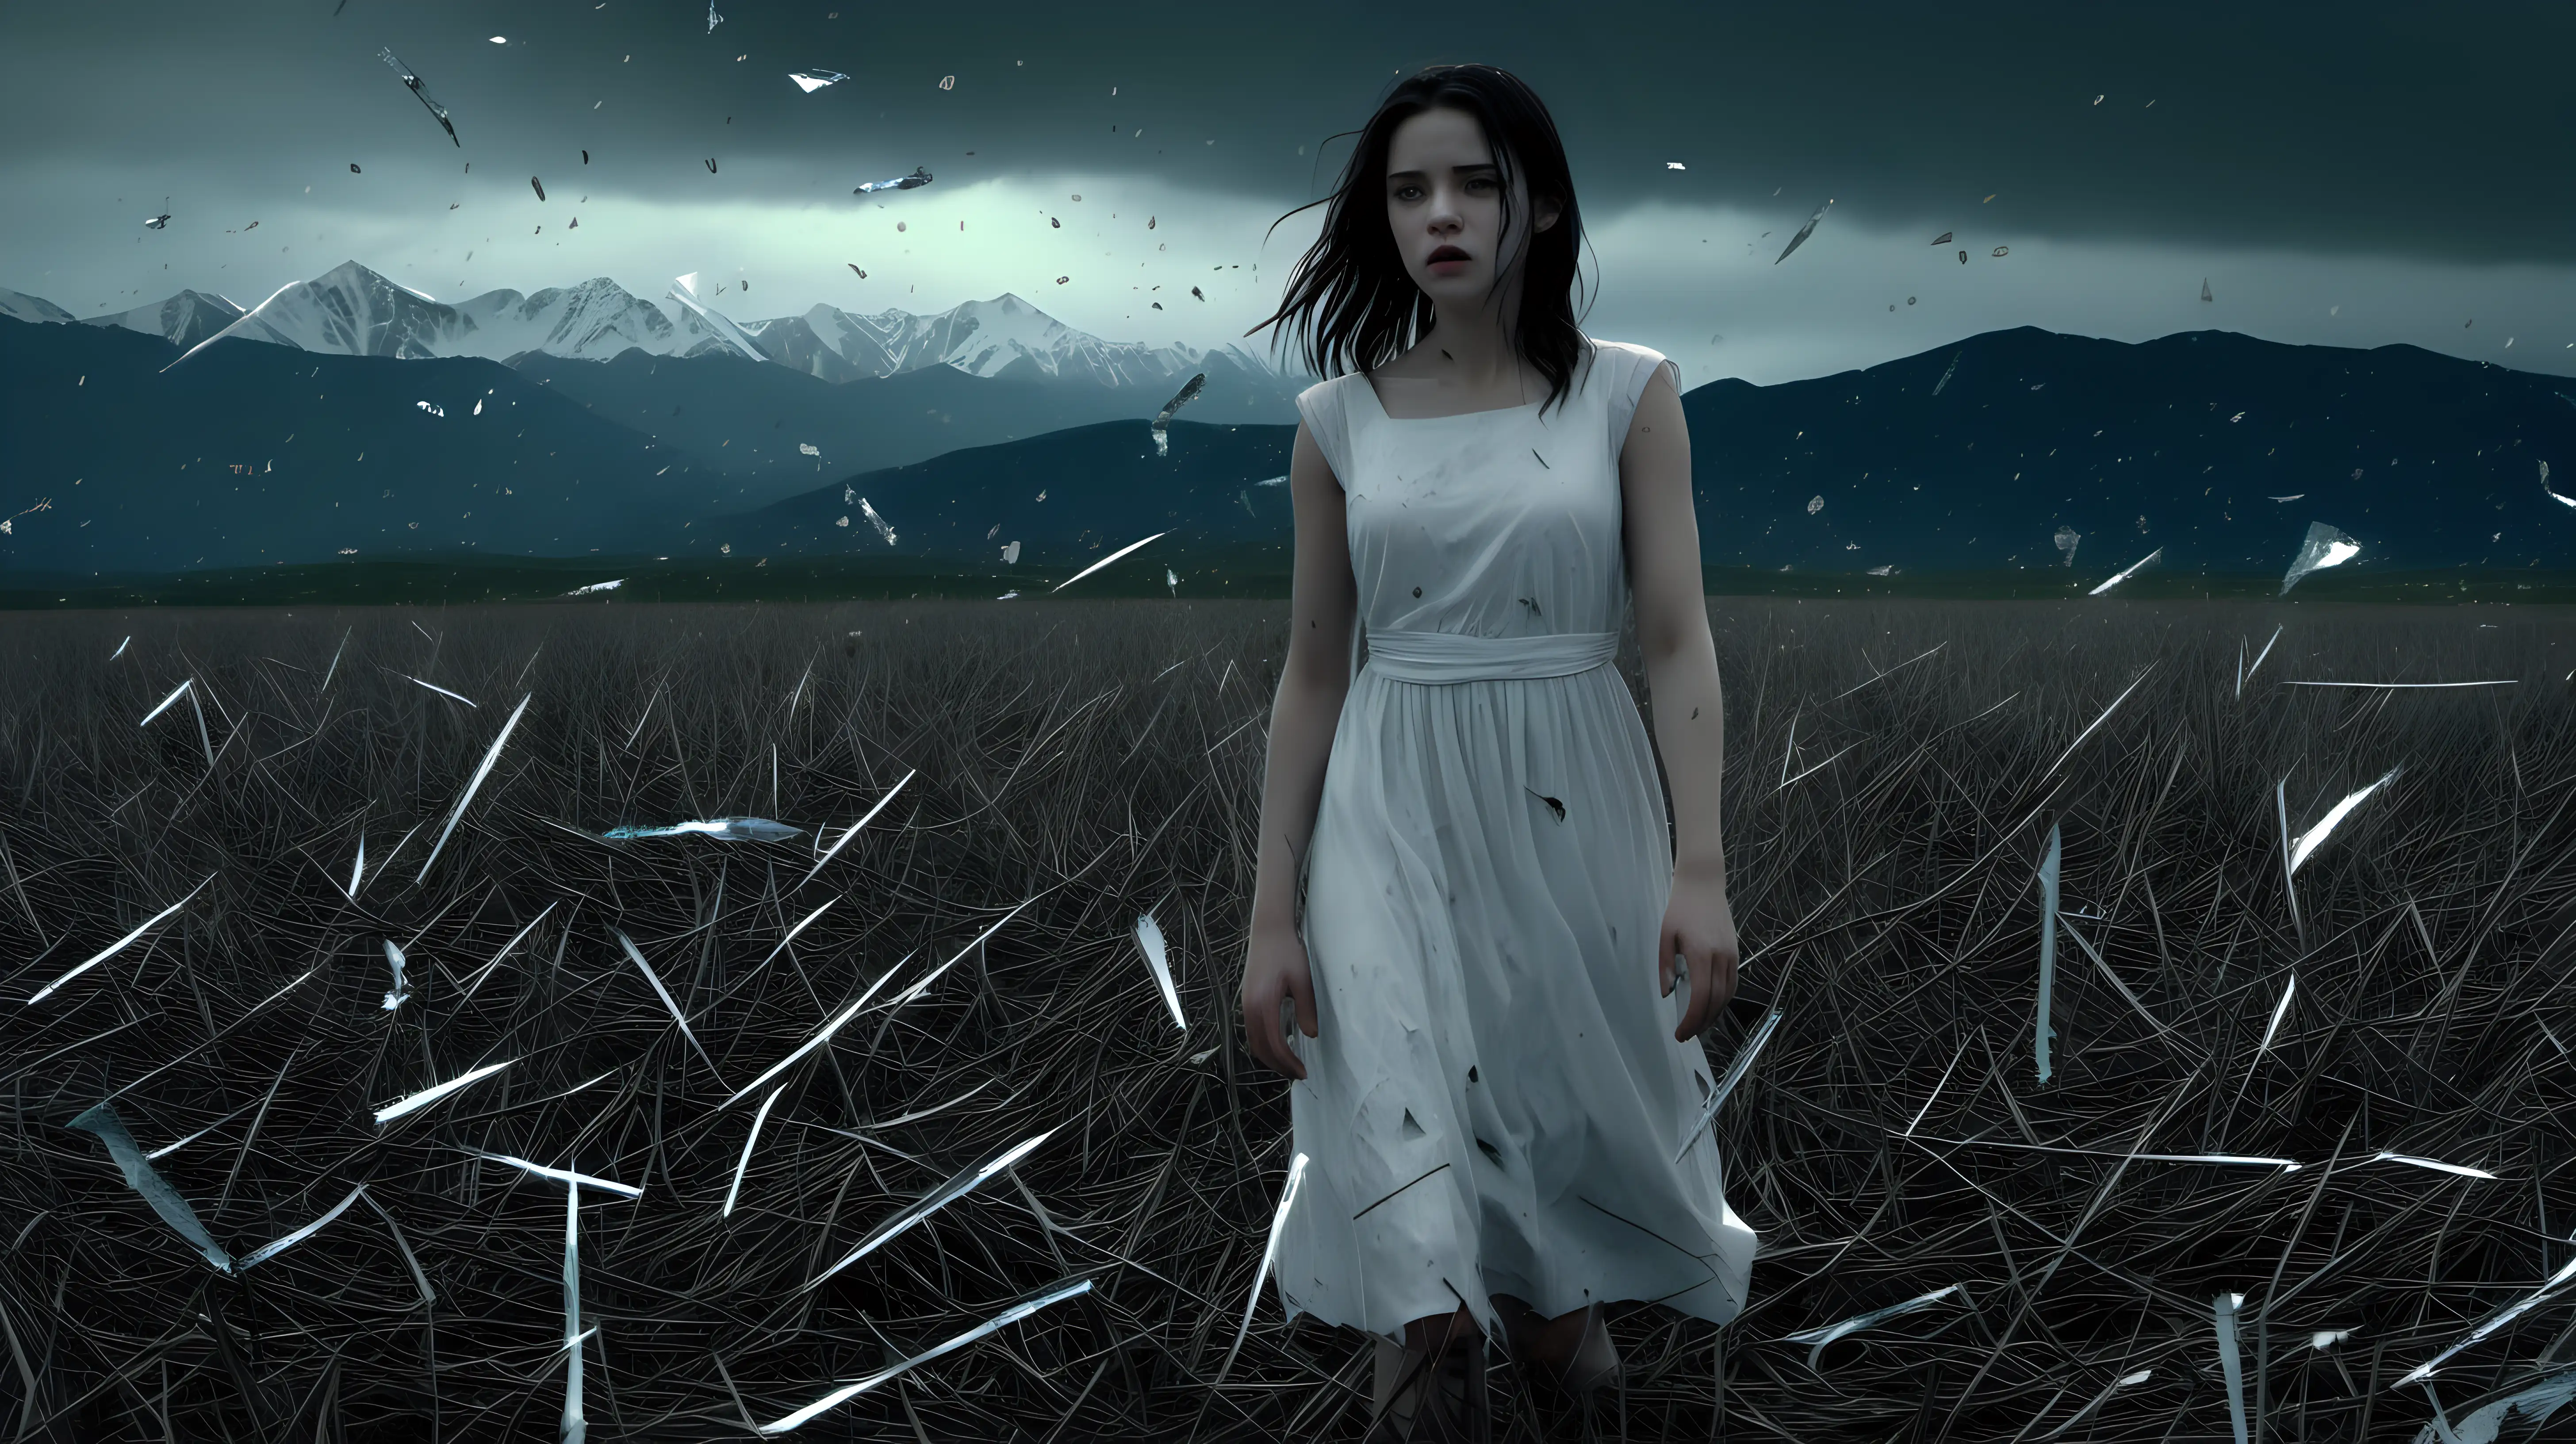 Setting: a field of dead grass with mountains in the far distance
Characters: One girl in a white dress
Weather: Grey sky, raining pieces of broken glass